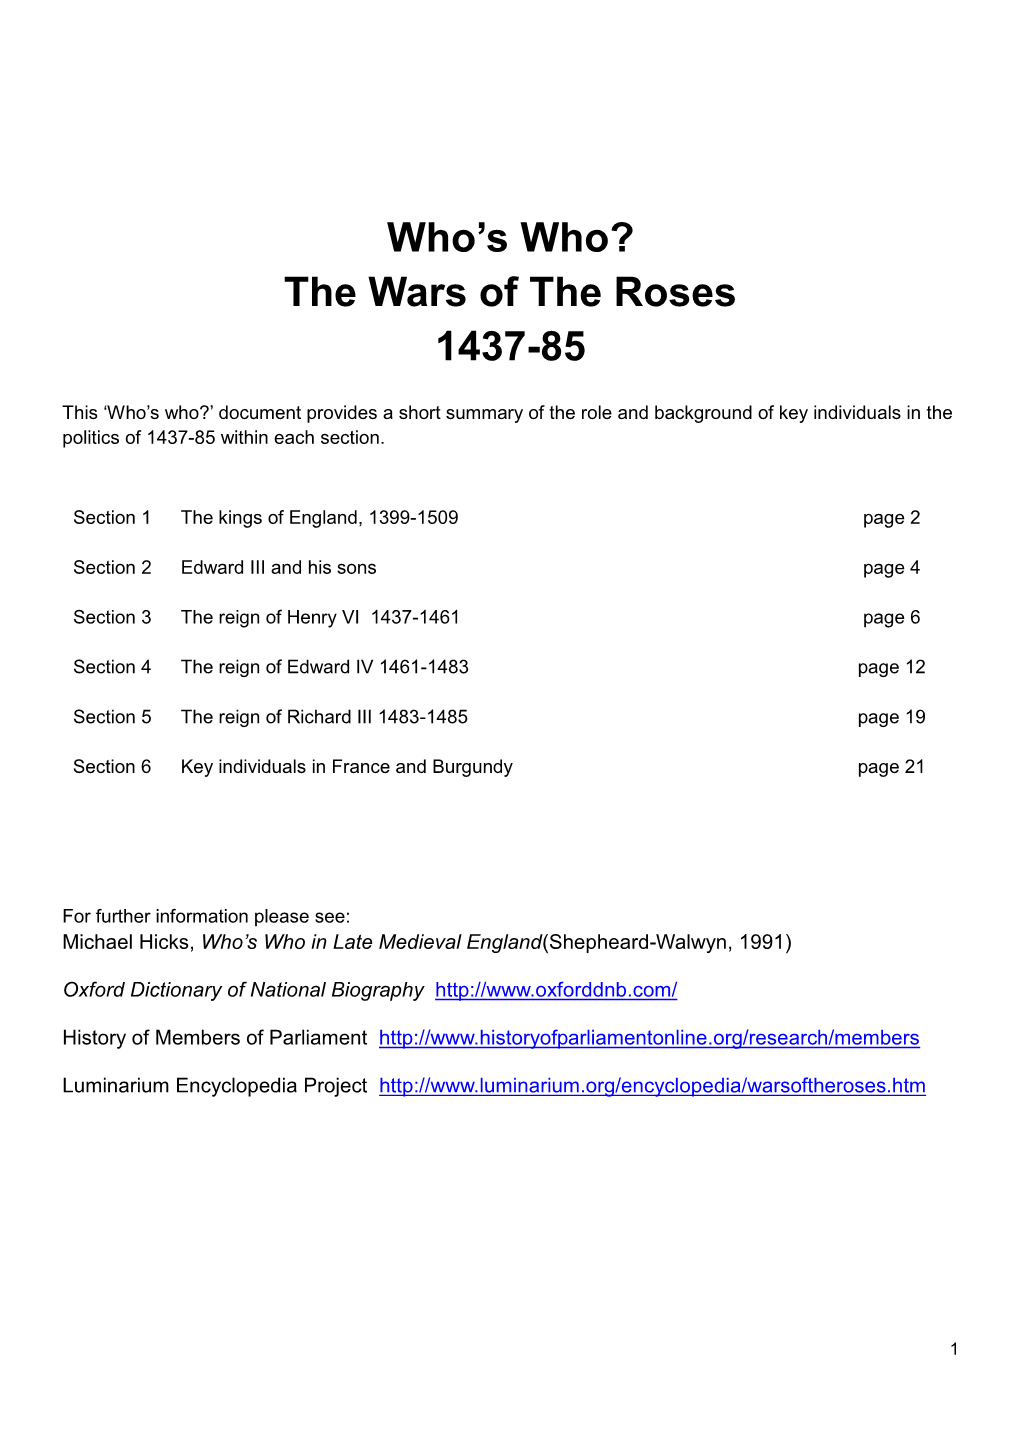 Who's Who? the Wars of the Roses 1437-85